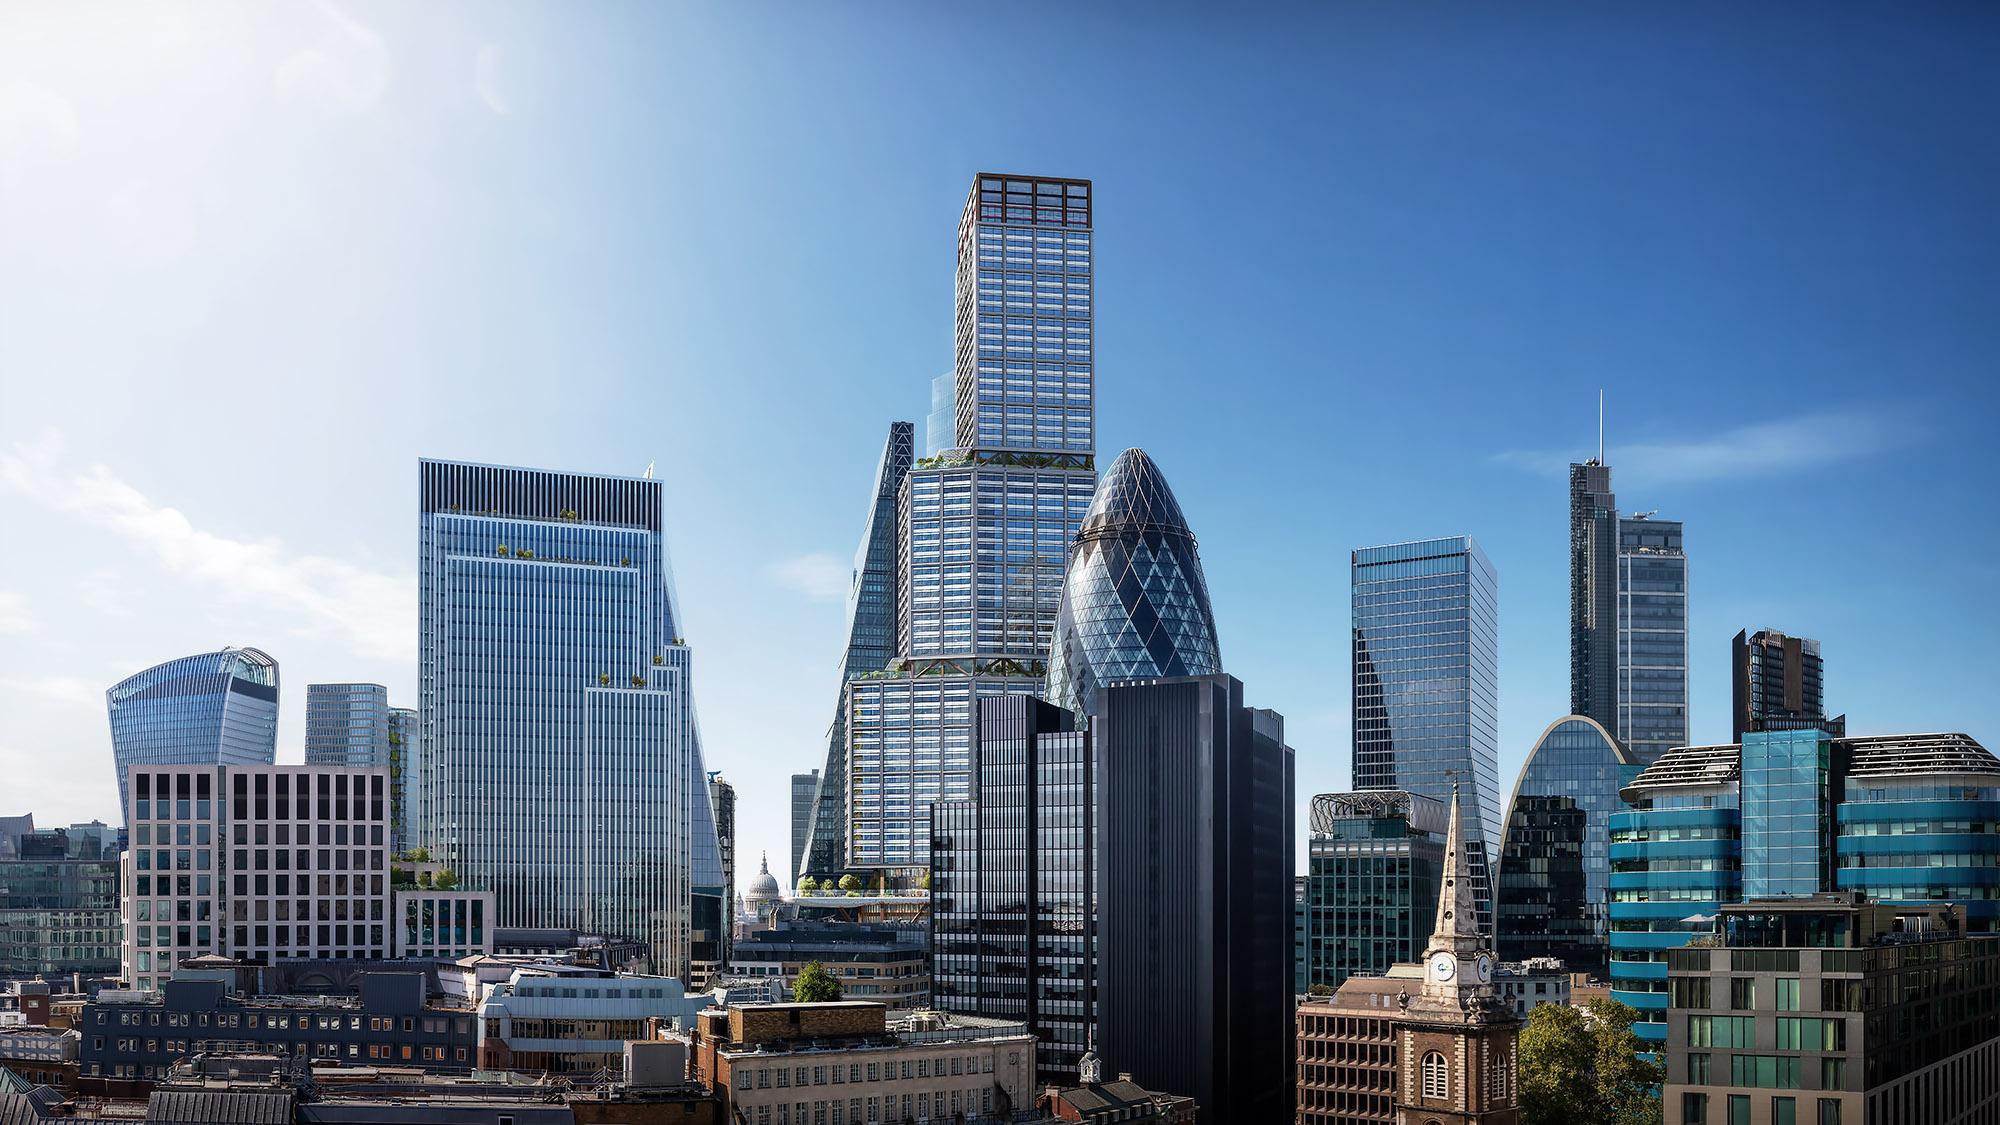 New Images of London Skyscraper as Tall as The Shard